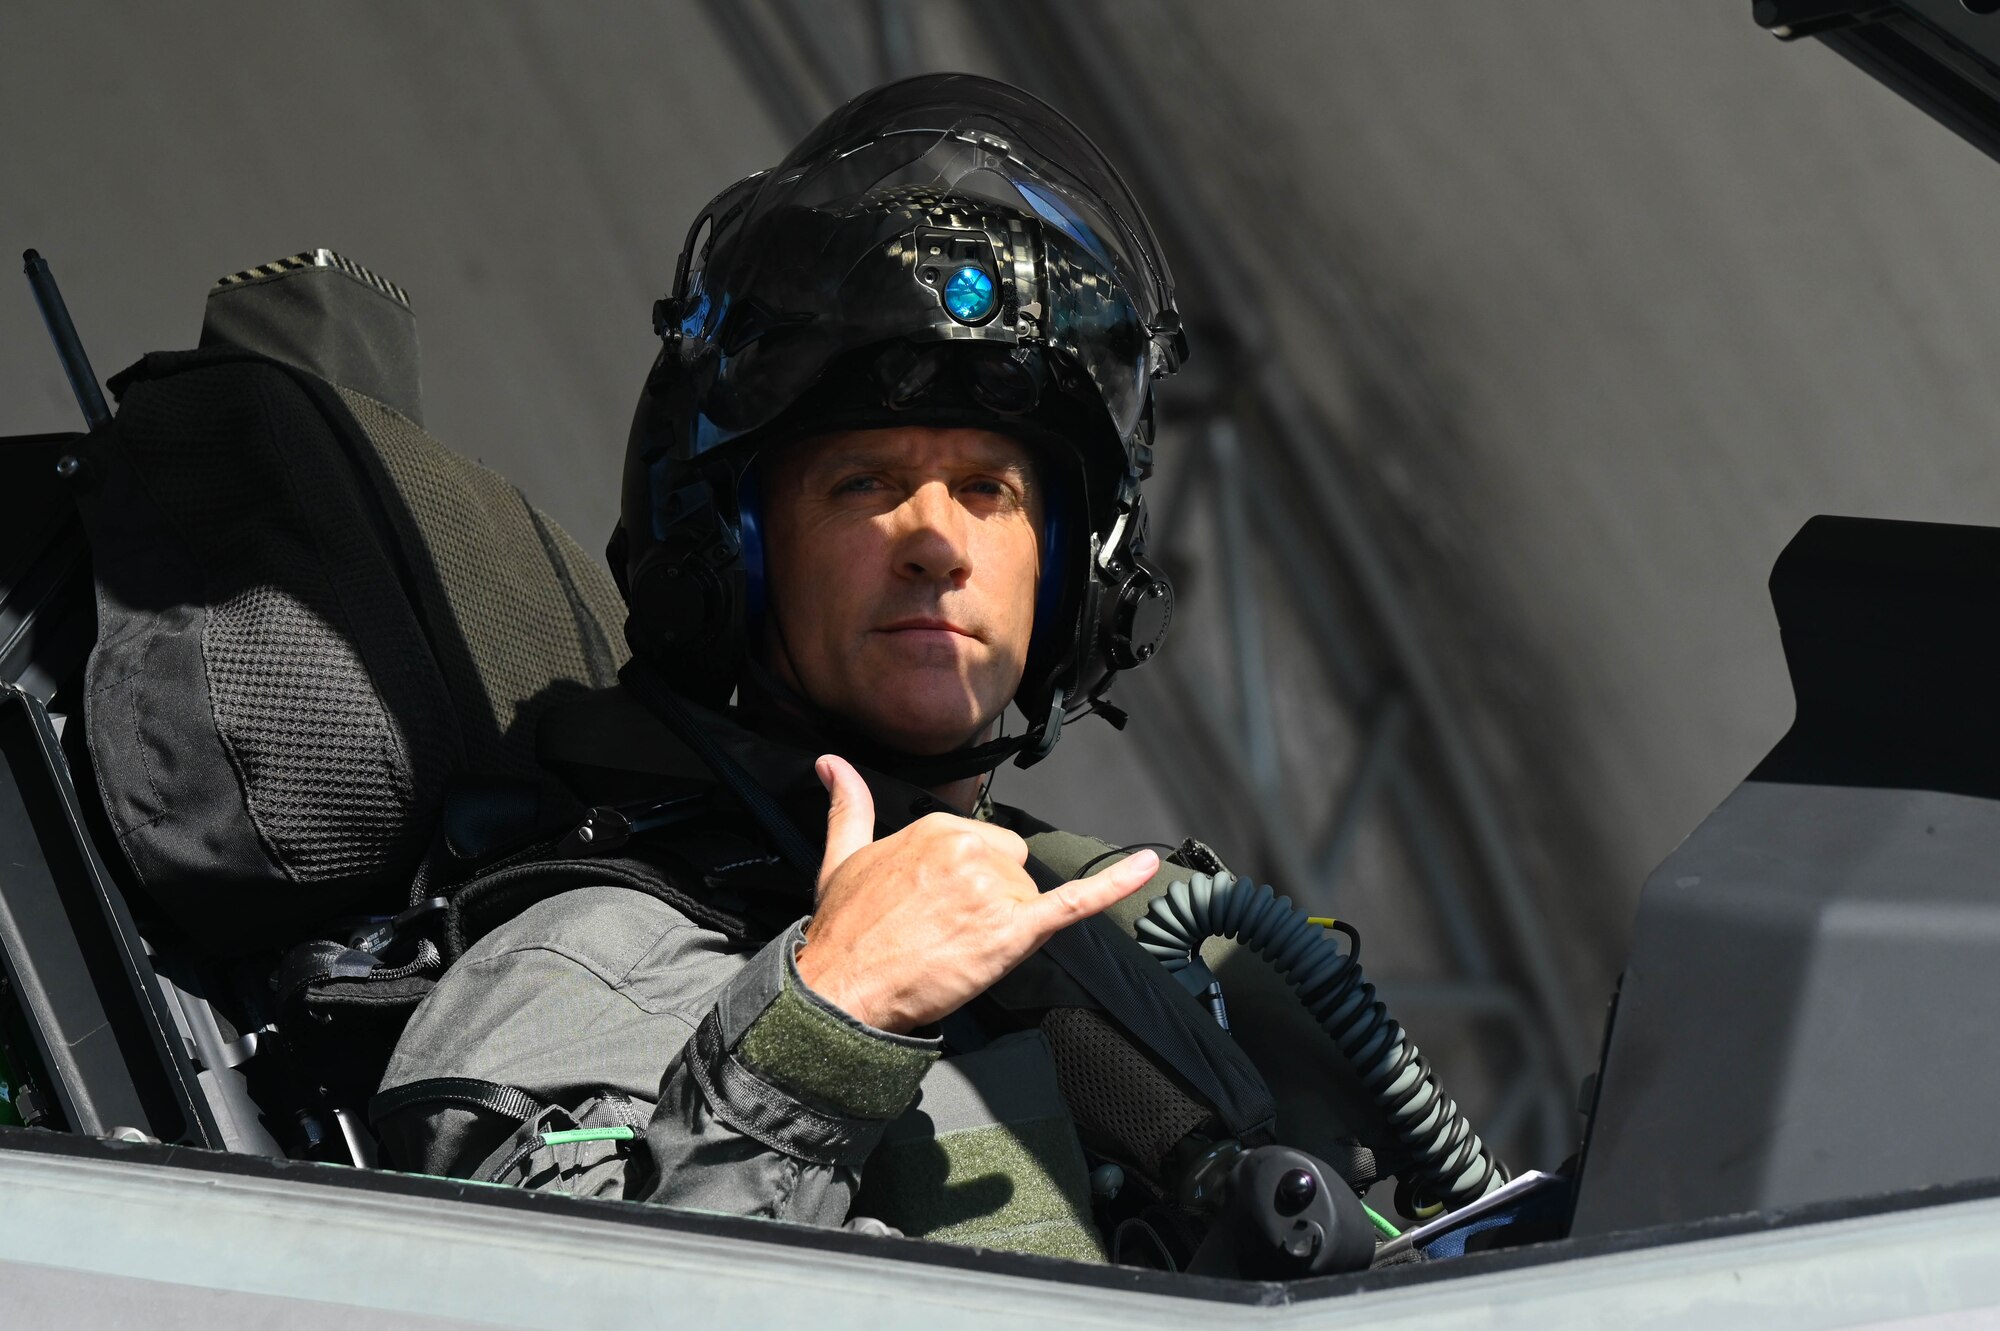 Rawls evaluated the F-35A’s ability to meet operational requirements.